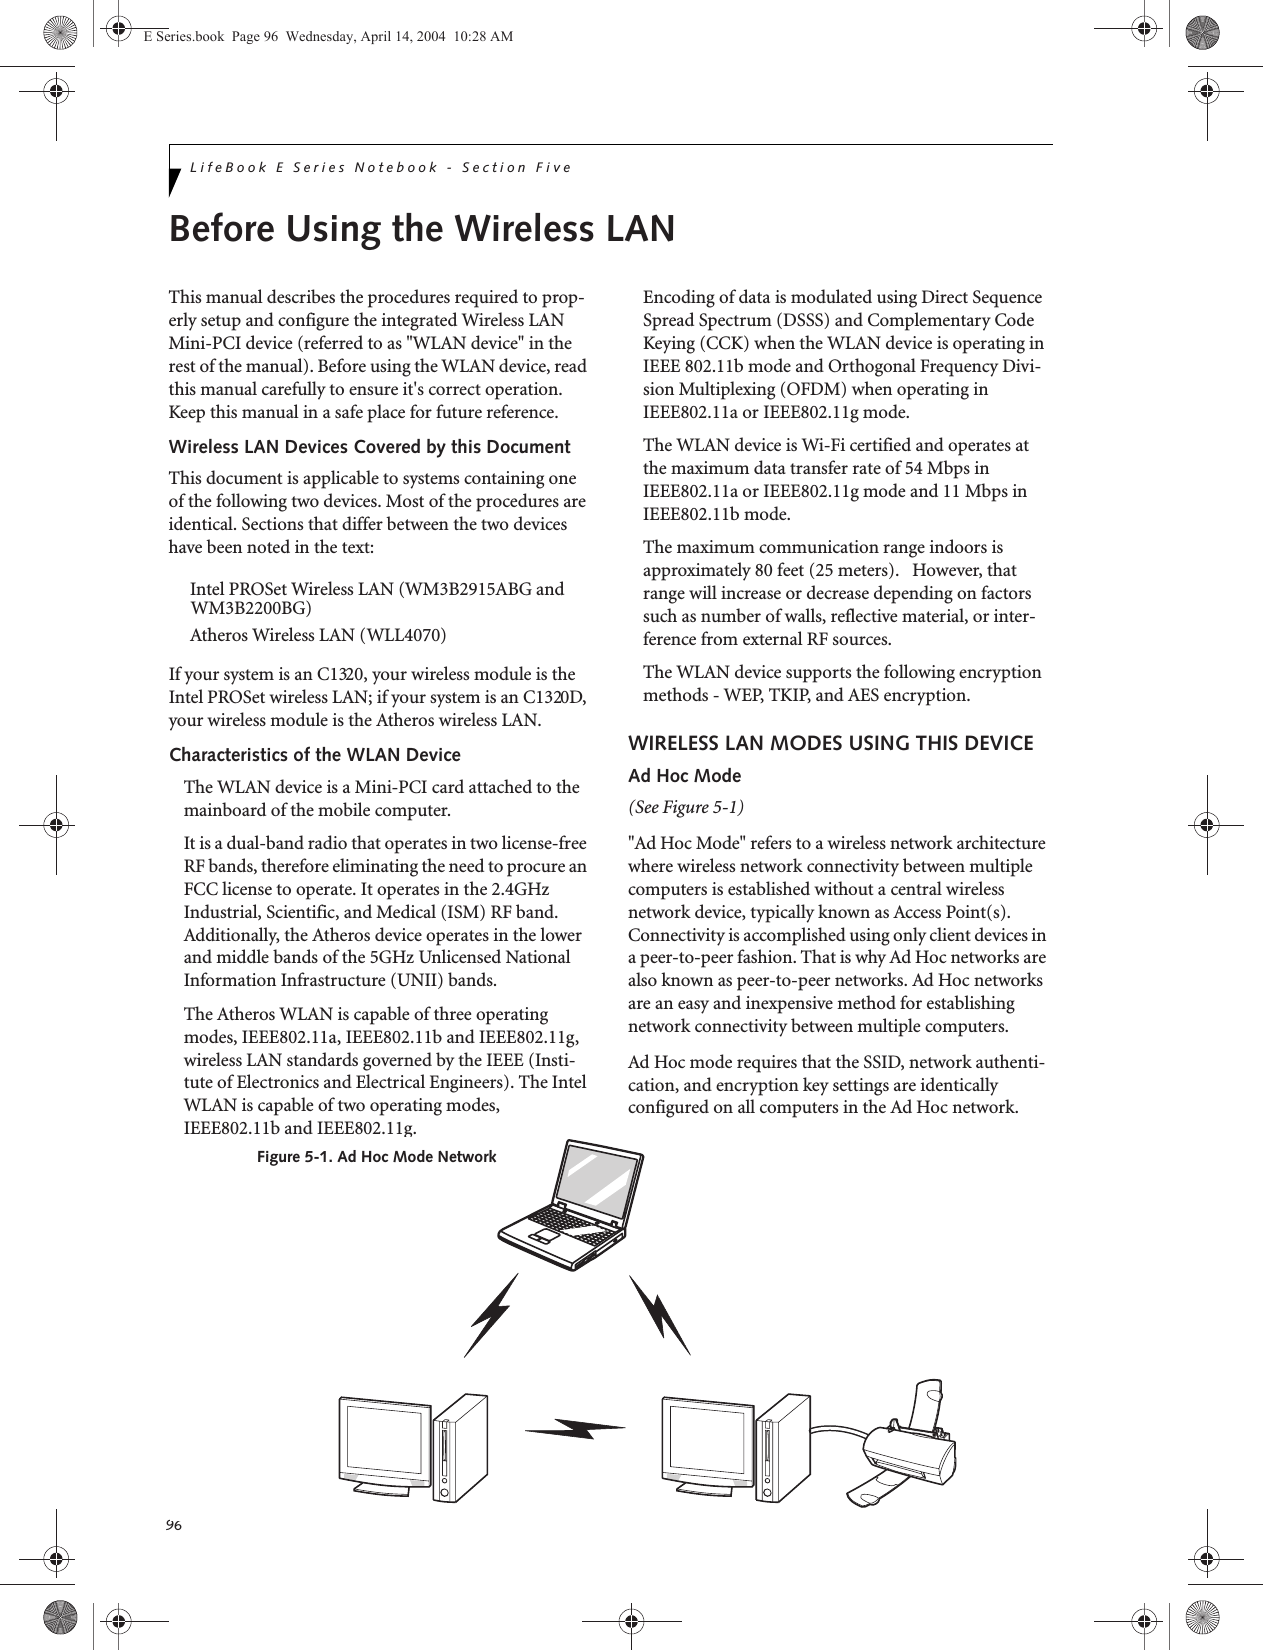 96LifeBook E Series Notebook - Section FiveBefore Using the Wireless LANThis manual describes the procedures required to prop-erly setup and configure the integrated Wireless LAN Mini-PCI device (referred to as &quot;WLAN device&quot; in the rest of the manual). Before using the WLAN device, read this manual carefully to ensure it&apos;s correct operation. Keep this manual in a safe place for future reference.Wireless LAN Devices Covered by this DocumentThis document is applicable to systems containing one of the following two devices. Most of the procedures are identical. Sections that differ between the two devices have been noted in the text:Intel PROSet Wireless LAN (WM3B2915ABG andAtheros Wireless LAN (WLL4070)If your system is an C1320, your wireless module is the Intel PROSet wireless LAN; if your system is an C1320D, your wireless module is the Atheros wireless LAN.Characteristics of the WLAN DeviceThe WLAN device is a Mini-PCI card attached to the mainboard of the mobile computer. It is a dual-band radio that operates in two license-free RF bands, therefore eliminating the need to procure an FCC license to operate. It operates in the 2.4GHz Industrial, Scientific, and Medical (ISM) RF band. Additionally, the Atheros device operates in the lower and middle bands of the 5GHz Unlicensed National Information Infrastructure (UNII) bands. The Atheros WLAN is capable of three operating modes, IEEE802.11a, IEEE802.11b and IEEE802.11g, wireless LAN standards governed by the IEEE (Insti-tute of Electronics and Electrical Engineers). The Intel WLAN is capable of two operating modes, IEEE802.11b and IEEE802.11g.Encoding of data is modulated using Direct Sequence Spread Spectrum (DSSS) and Complementary Code Keying (CCK) when the WLAN device is operating in IEEE 802.11b mode and Orthogonal Frequency Divi-sion Multiplexing (OFDM) when operating in IEEE802.11a or IEEE802.11g mode. The WLAN device is Wi-Fi certified and operates at the maximum data transfer rate of 54 Mbps in IEEE802.11a or IEEE802.11g mode and 11 Mbps in IEEE802.11b mode.The maximum communication range indoors is approximately 80 feet (25 meters).   However, that range will increase or decrease depending on factors such as number of walls, reflective material, or inter-ference from external RF sources.The WLAN device supports the following encryption methods - WEP, TKIP, and AES encryption.WIRELESS LAN MODES USING THIS DEVICEAd Hoc Mode (See Figure 5-1)&quot;Ad Hoc Mode&quot; refers to a wireless network architecture where wireless network connectivity between multiple computers is established without a central wireless network device, typically known as Access Point(s). Connectivity is accomplished using only client devices in a peer-to-peer fashion. That is why Ad Hoc networks are also known as peer-to-peer networks. Ad Hoc networks are an easy and inexpensive method for establishing network connectivity between multiple computers.Ad Hoc mode requires that the SSID, network authenti-cation, and encryption key settings are identically configured on all computers in the Ad Hoc network. Figure 5-1. Ad Hoc Mode NetworkE Series.book  Page 96  Wednesday, April 14, 2004  10:28 AMWM3B2200BG)